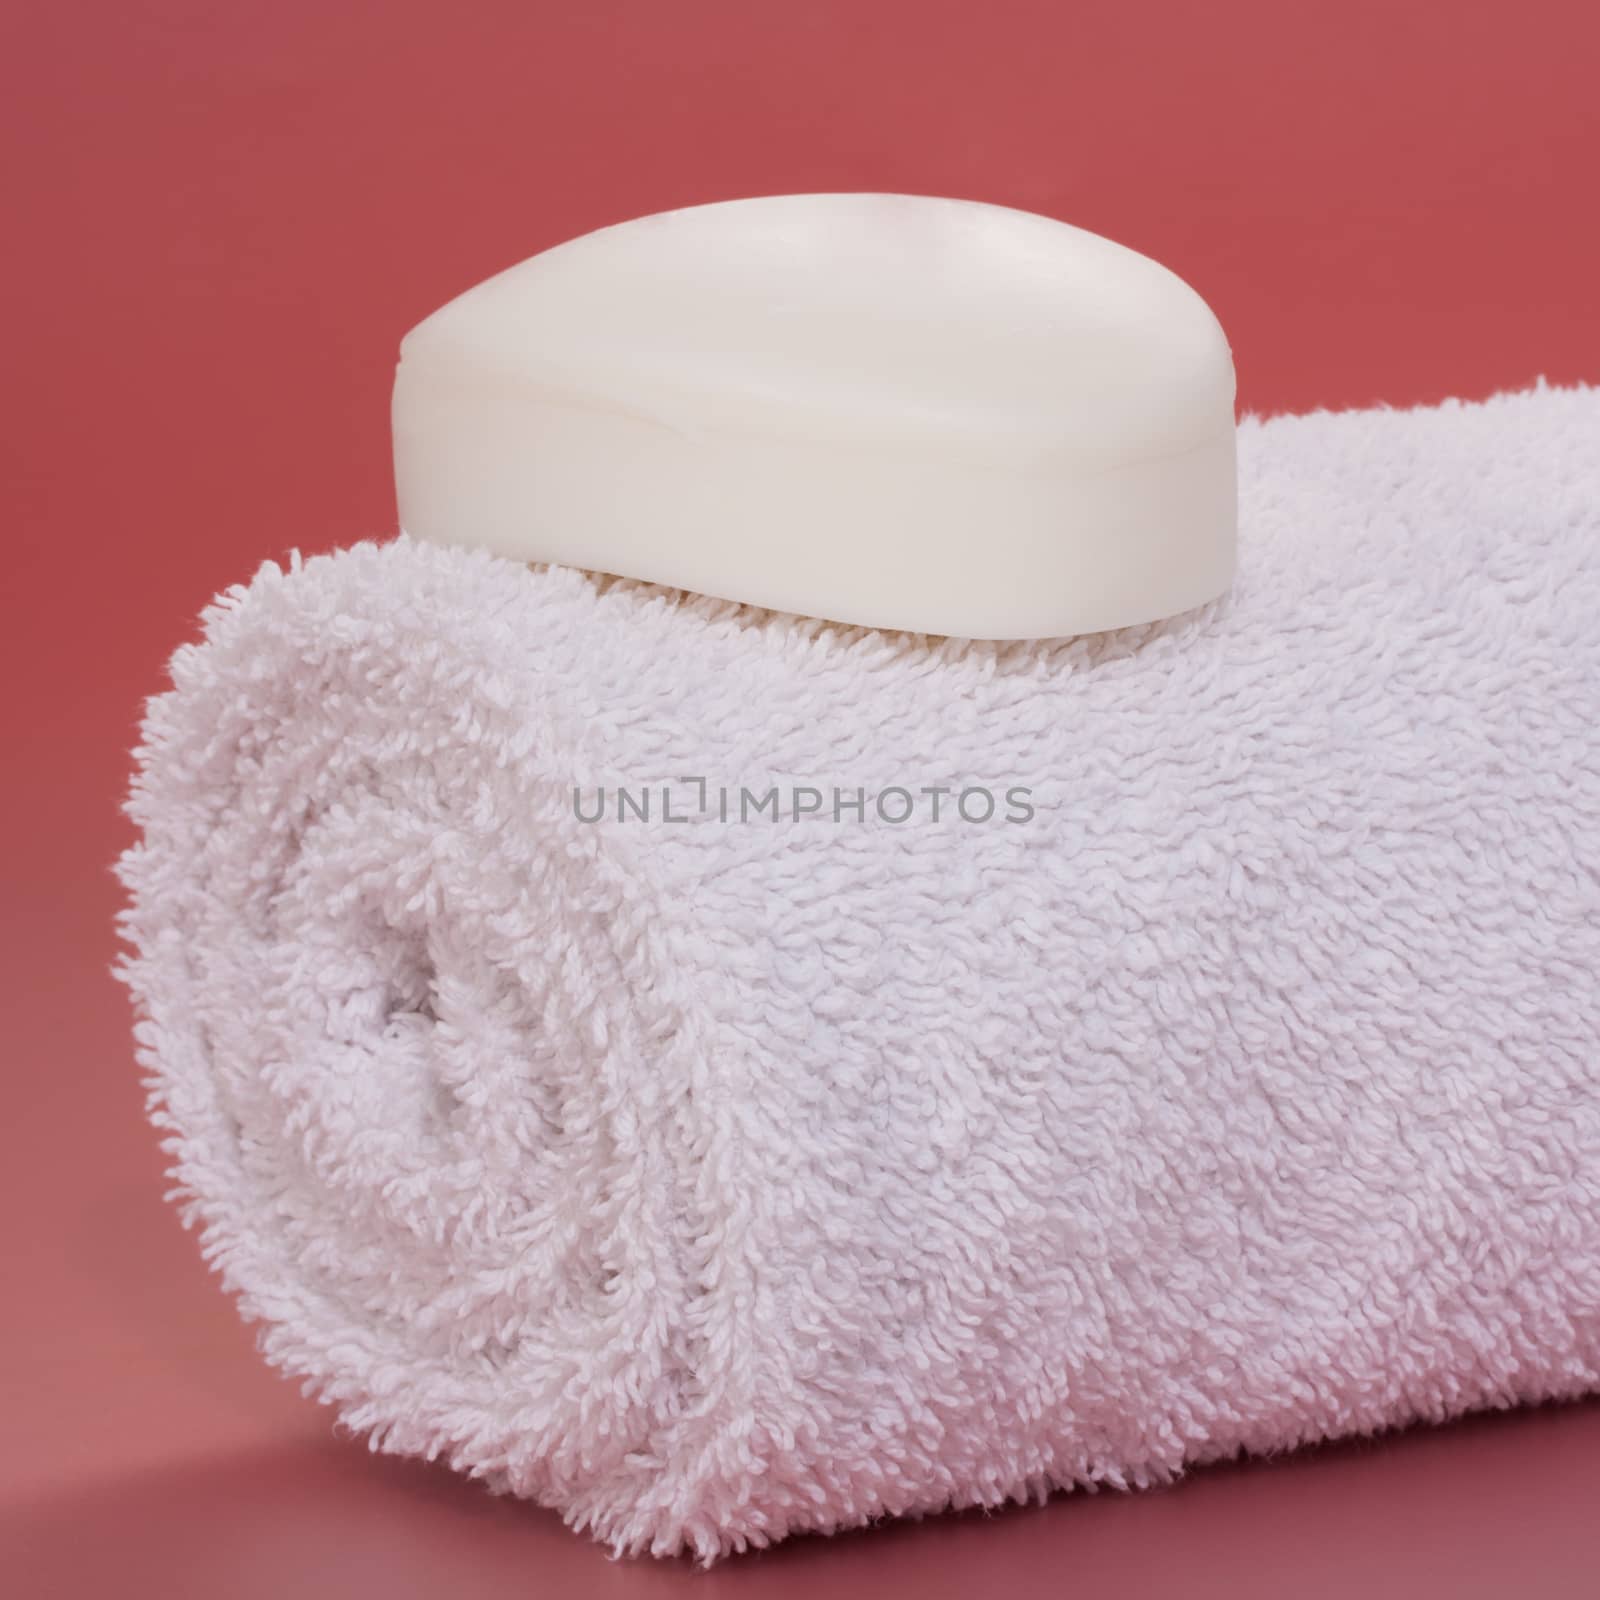 soap bar under a rolled towel by lanalanglois